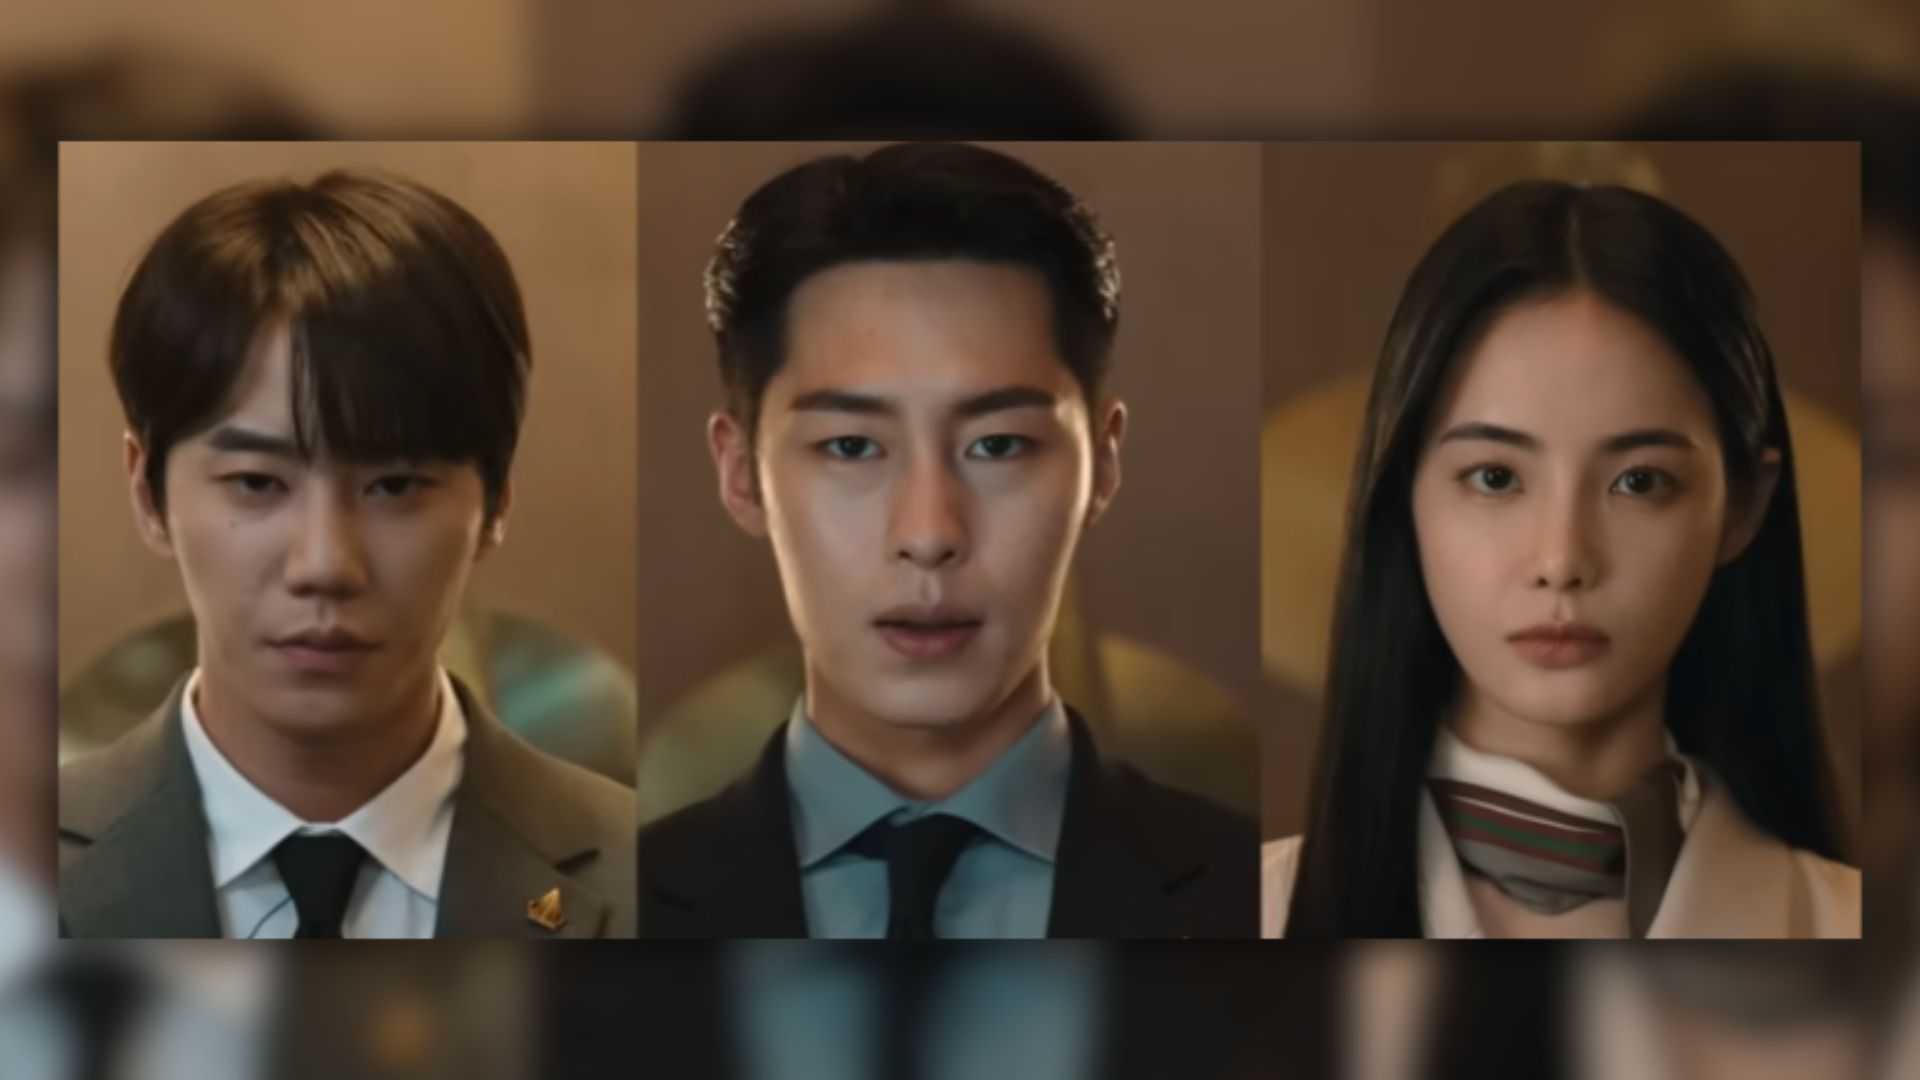 WATCH: ‘The Impossible Heir’ topples hierarchy in new teaser